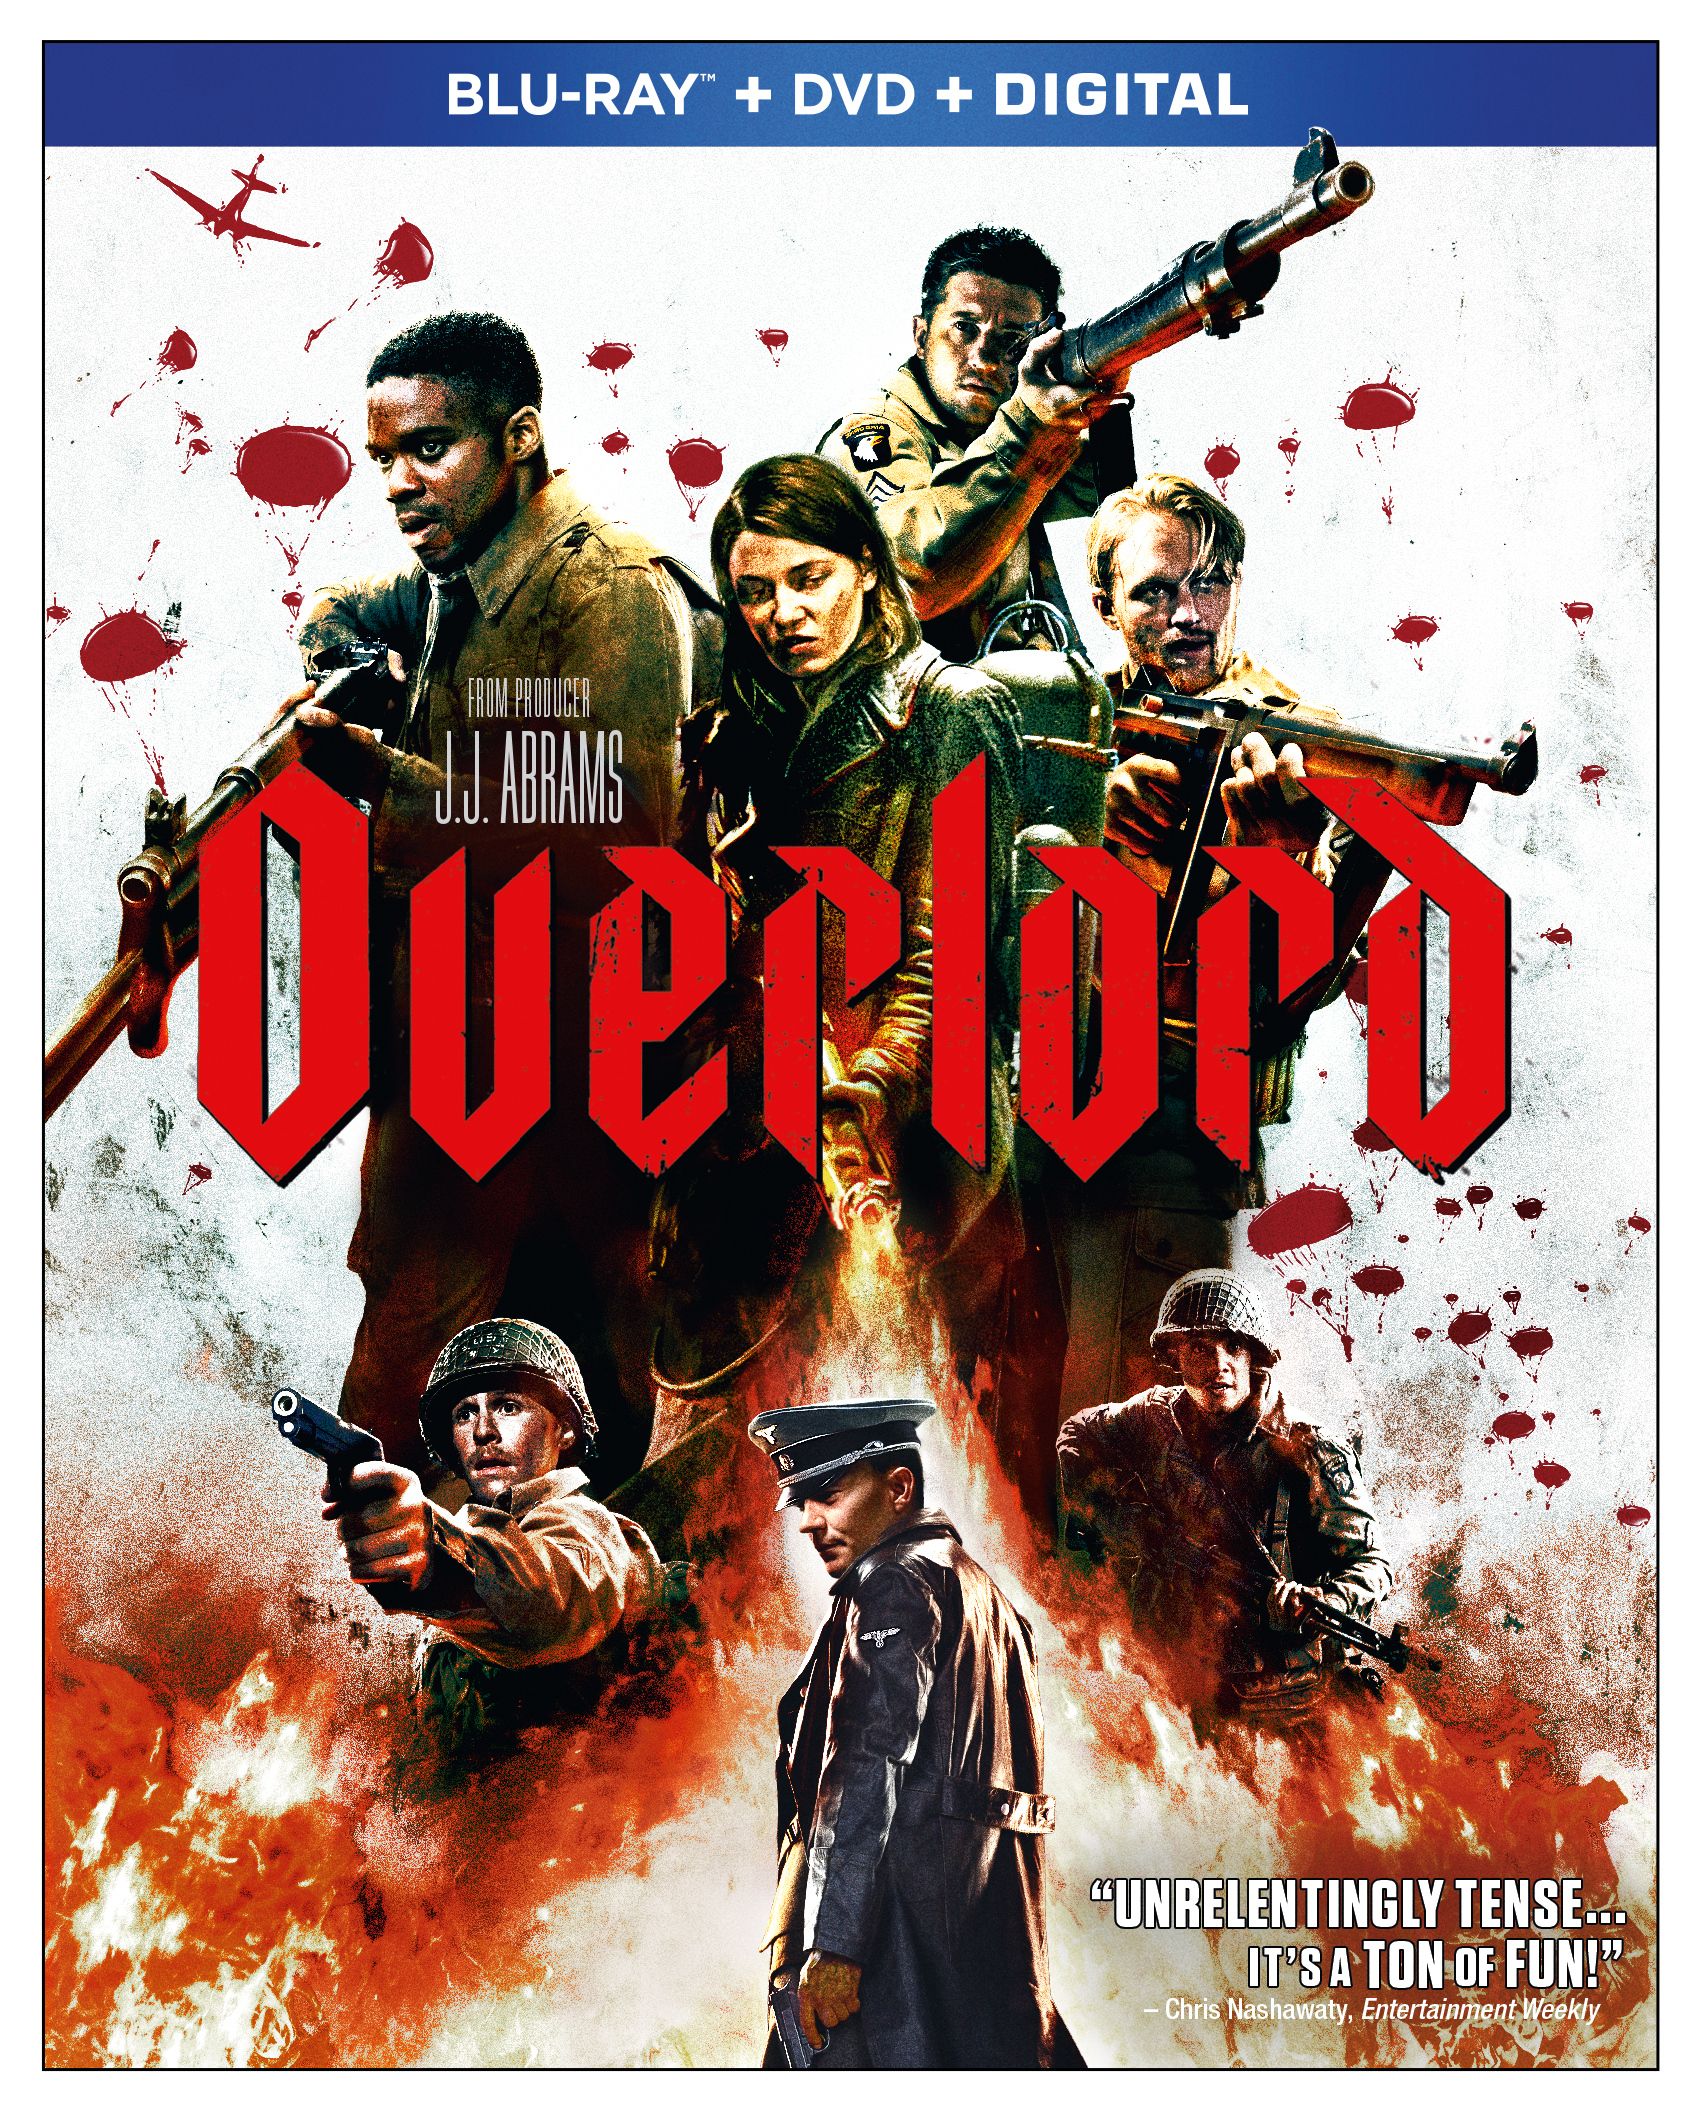 Overlord Blu-ray cover art